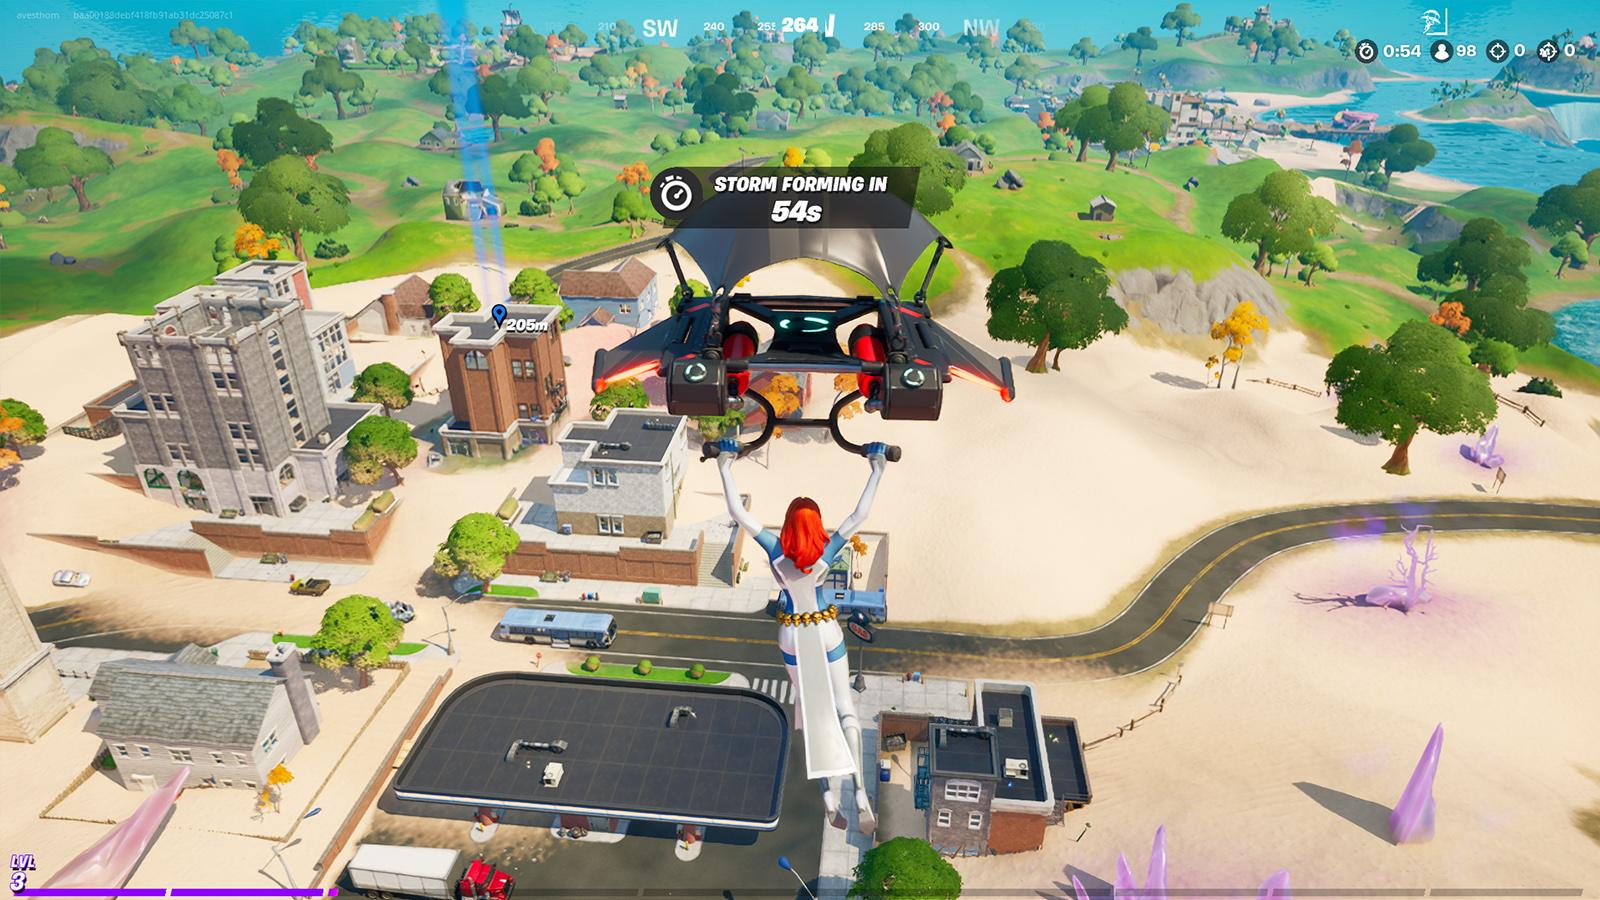 Tilted Towers is back as Salty Towers in the new update